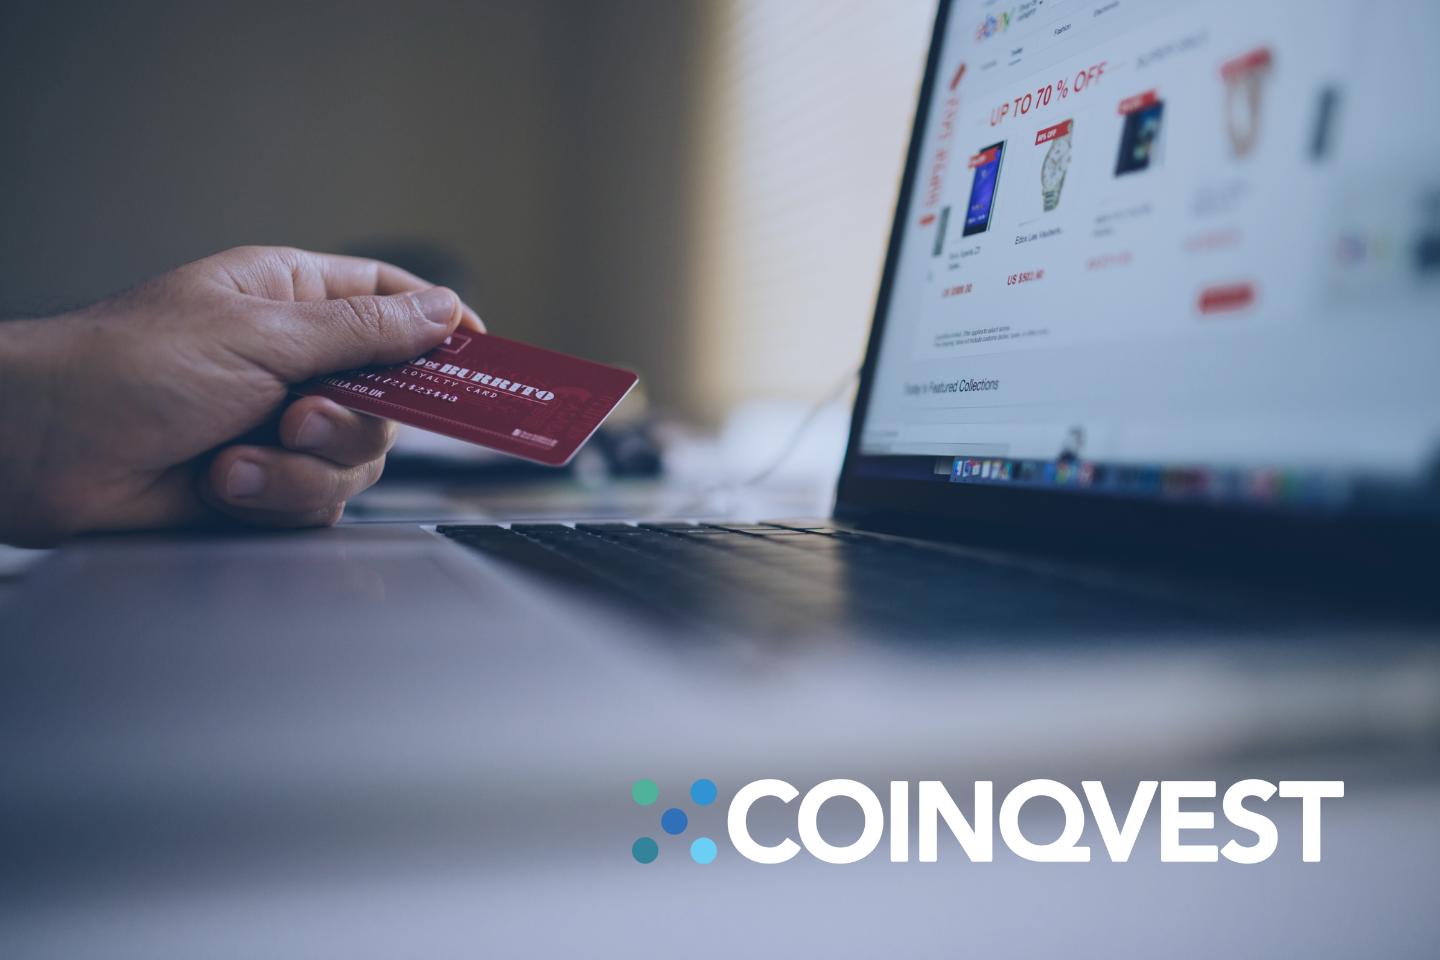 COINQVEST Hosted Checkouts Now Offer 50 Fiat Settlements